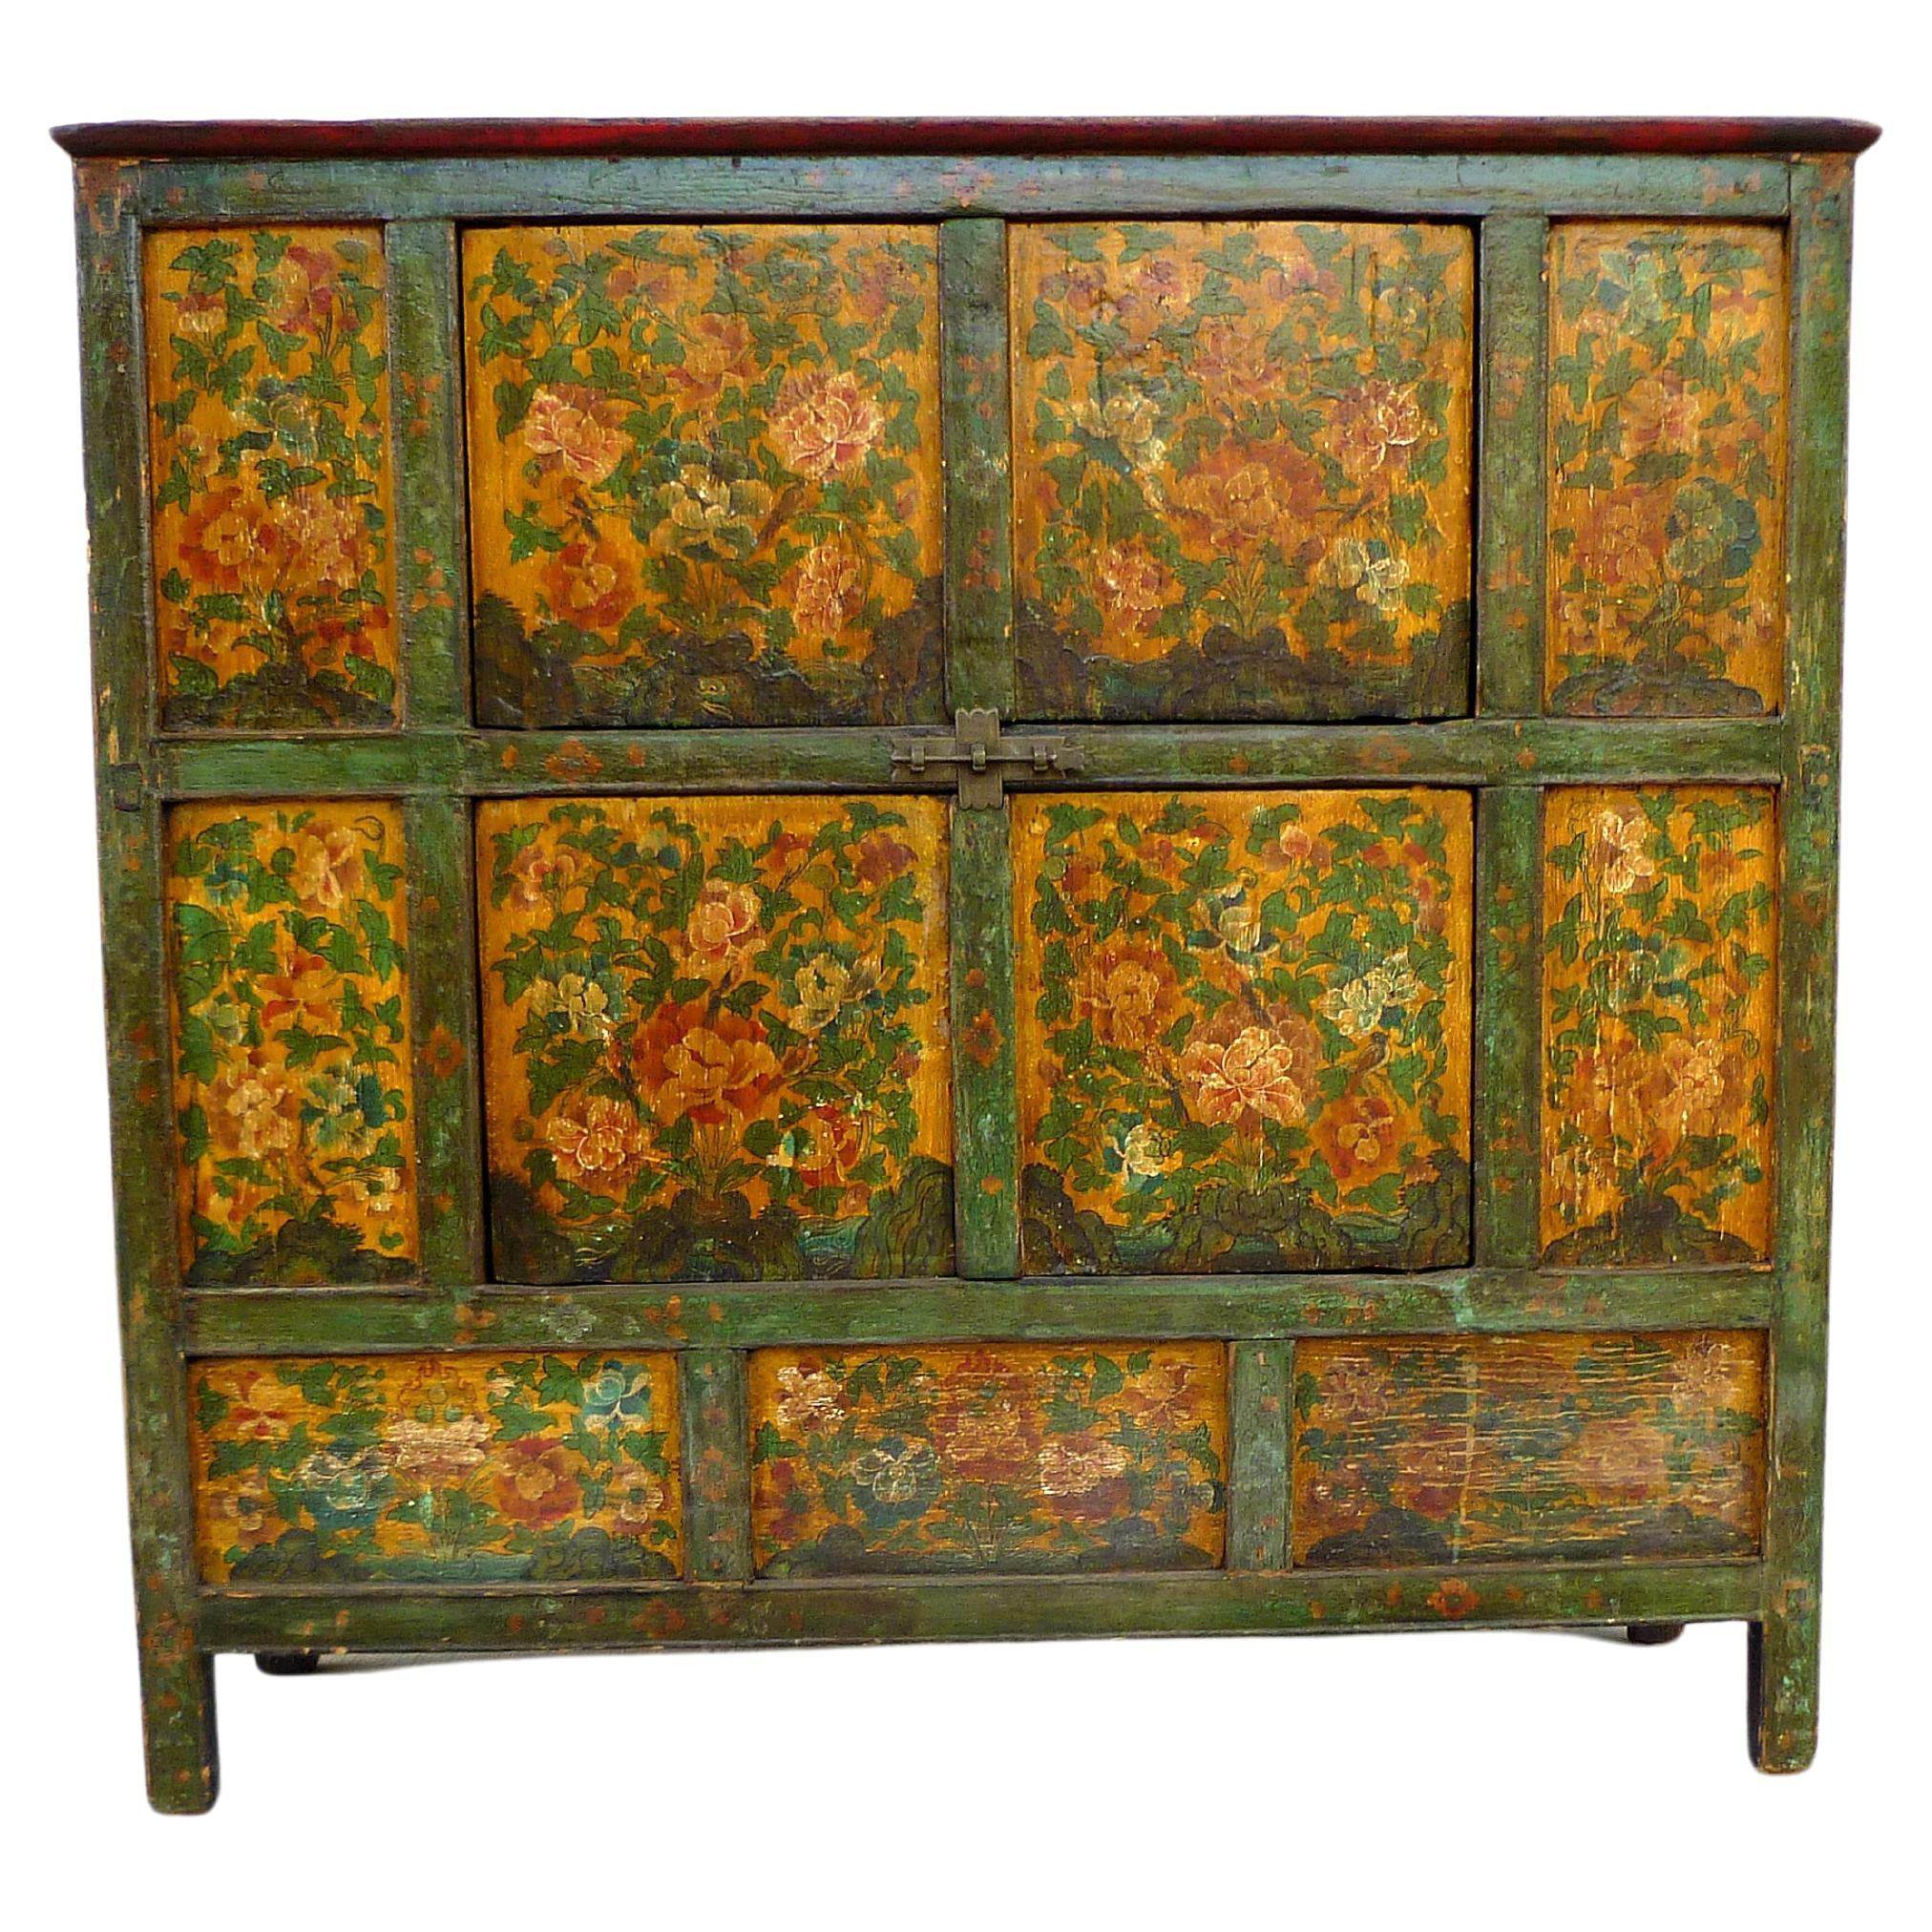 Tibetan Chest with Floral Motif